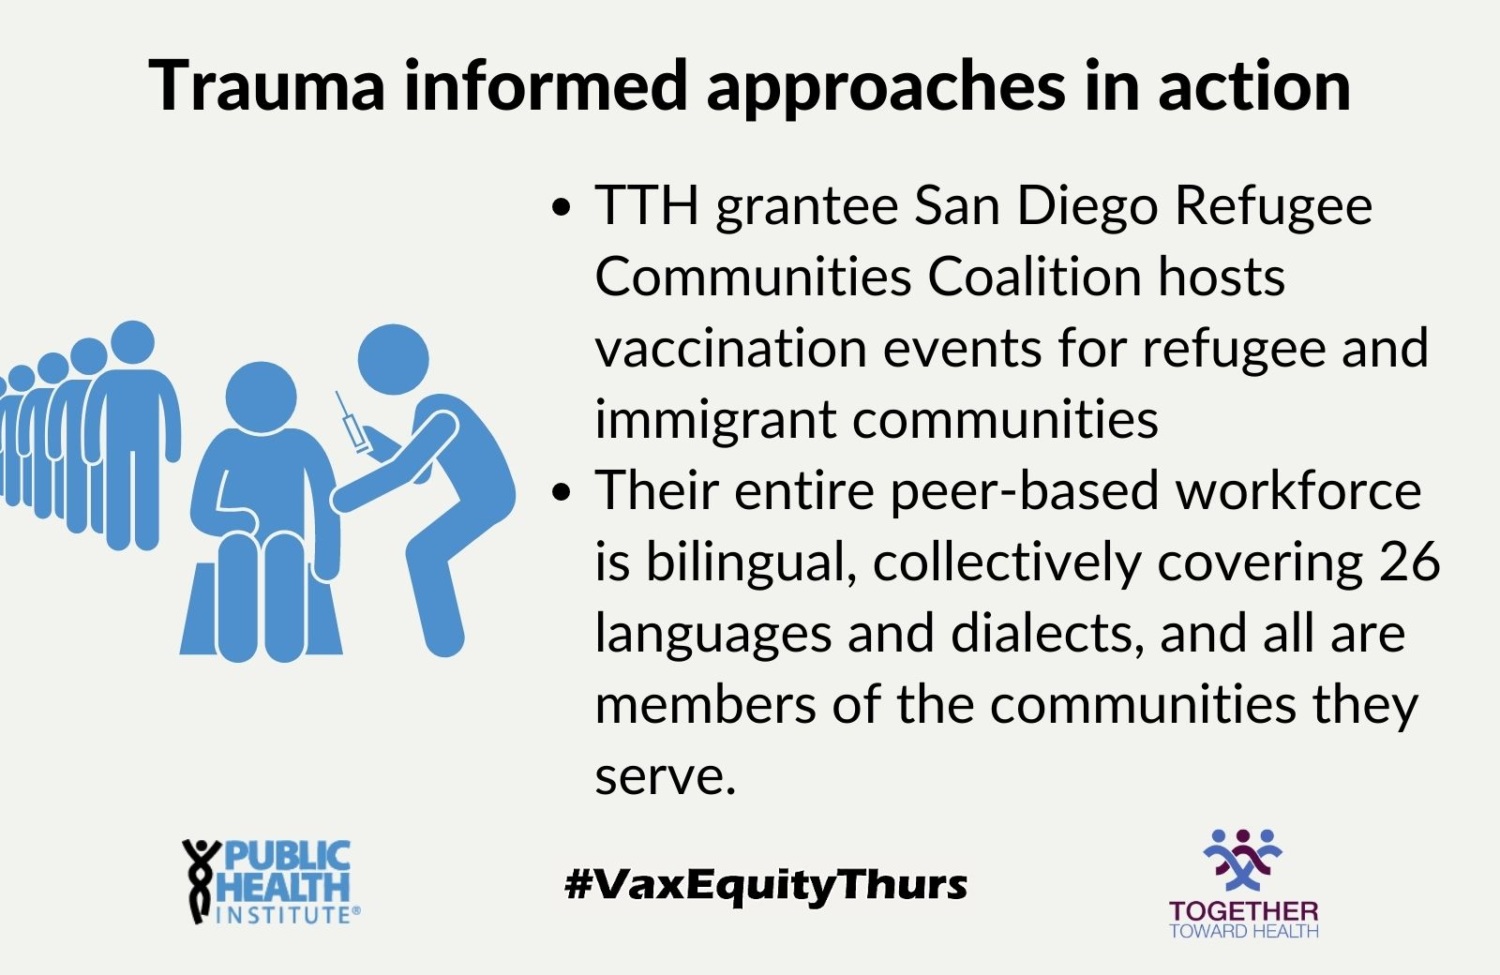 Trauma informed approaches in action TTH grantee San Diego Refugee Communities Coalition hosts vaccination events for refugee and immigrant communities Their entire peer-based workforce is bilingual, collectively covering 26 languages and dialects, and all are members of the communities they serve.